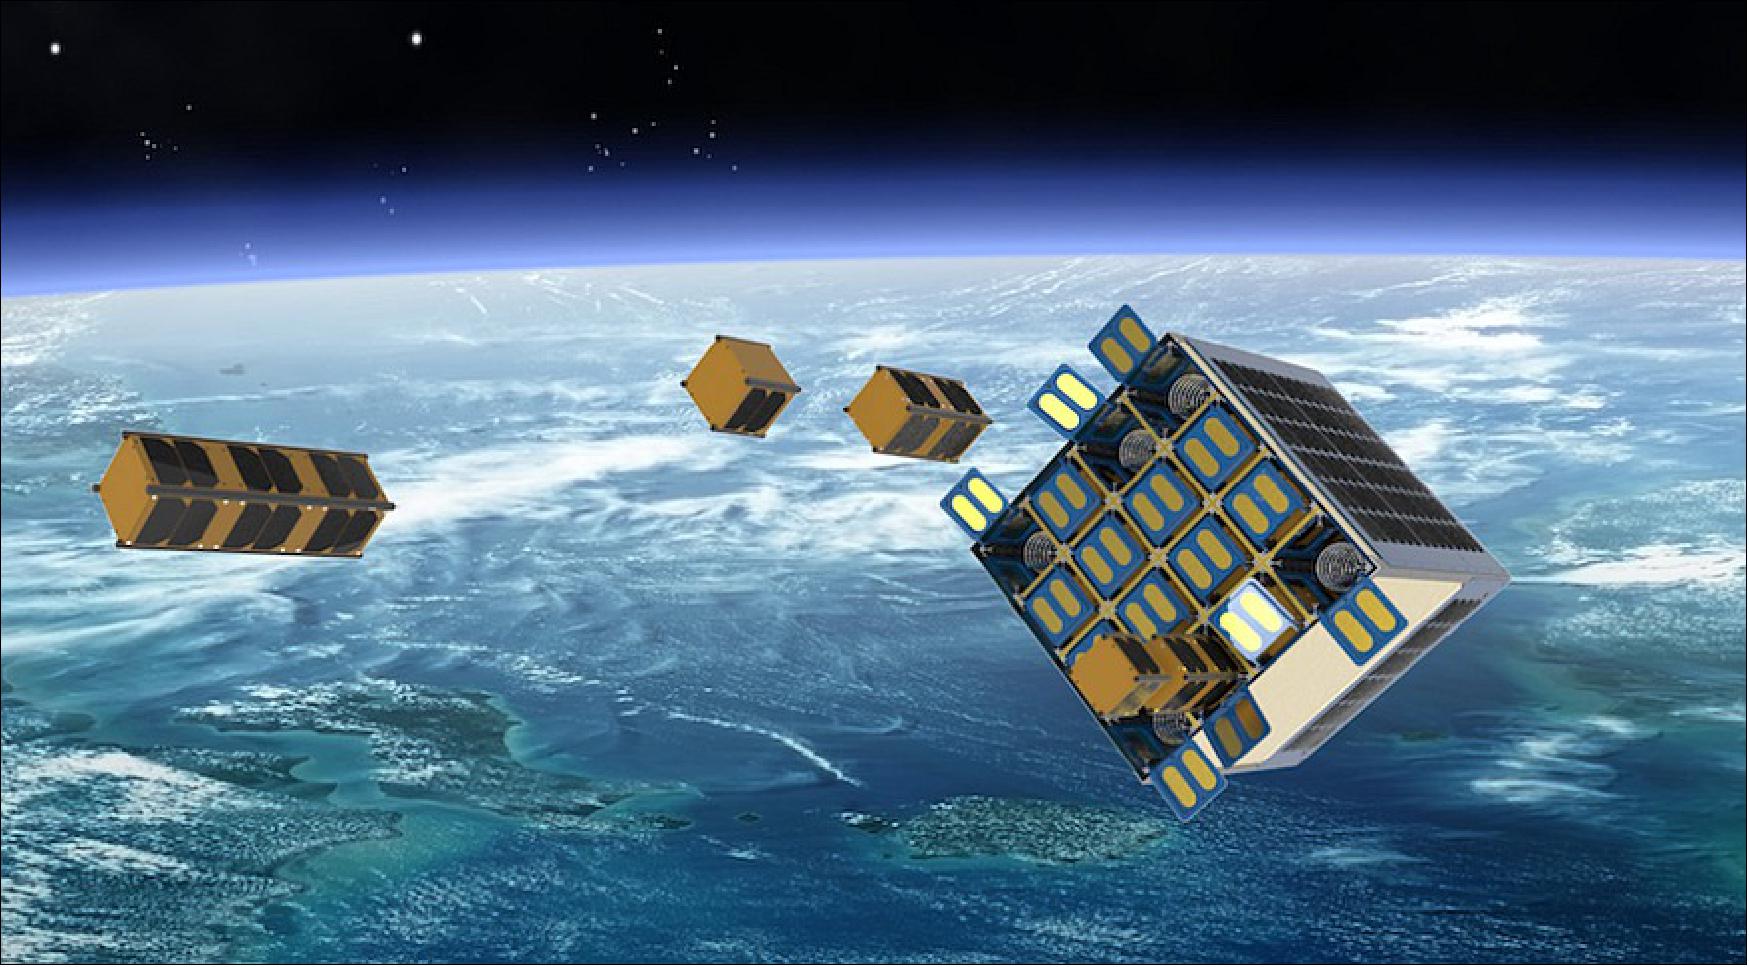 Figure 4: D-Orbit offers in-space transportation services with its ION satellite carrier (image credit: D-Orbit)